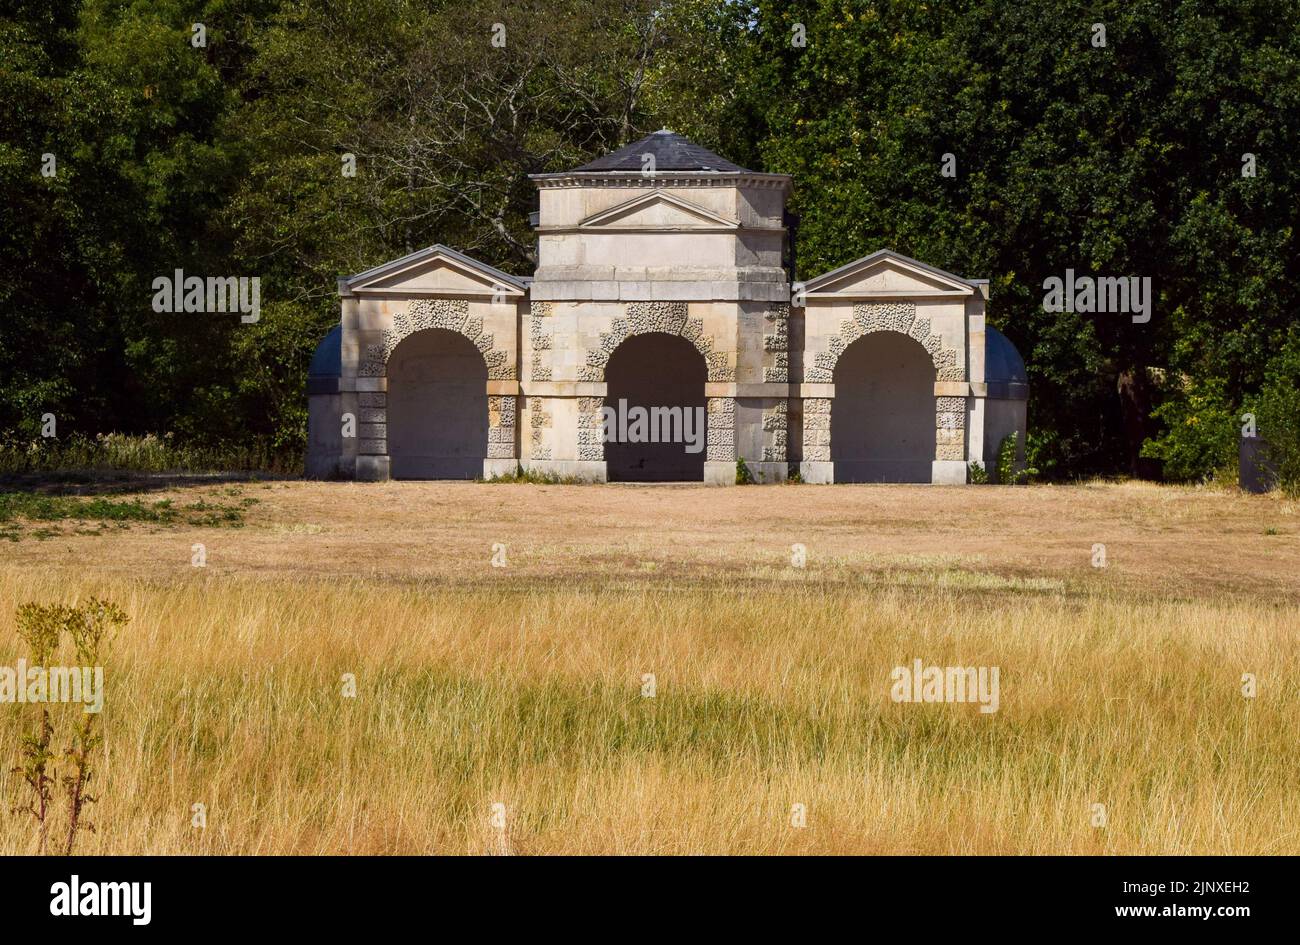 London, UK. 14th August 2022. Dry grass surrounds Queen Caroline's Temple in Kensington Gardens as a drought is officially declared in parts of England. Credit: Vuk Valcic/Alamy Live News Stock Photo